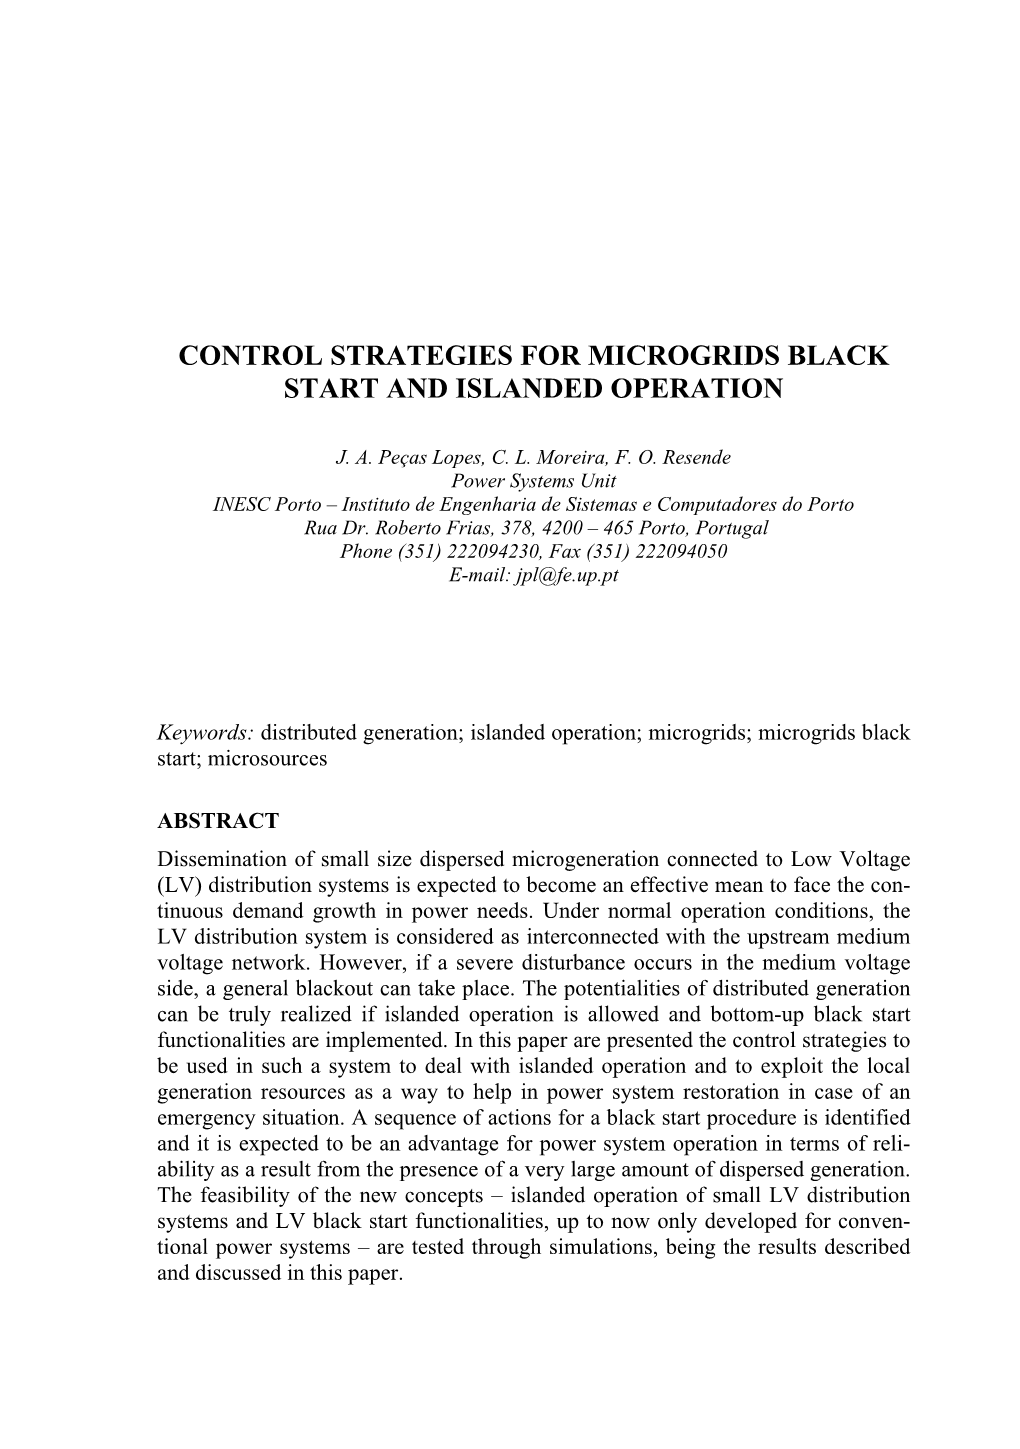 31. "Control Strategies for Microgrids Black Start and Islanded Operation"